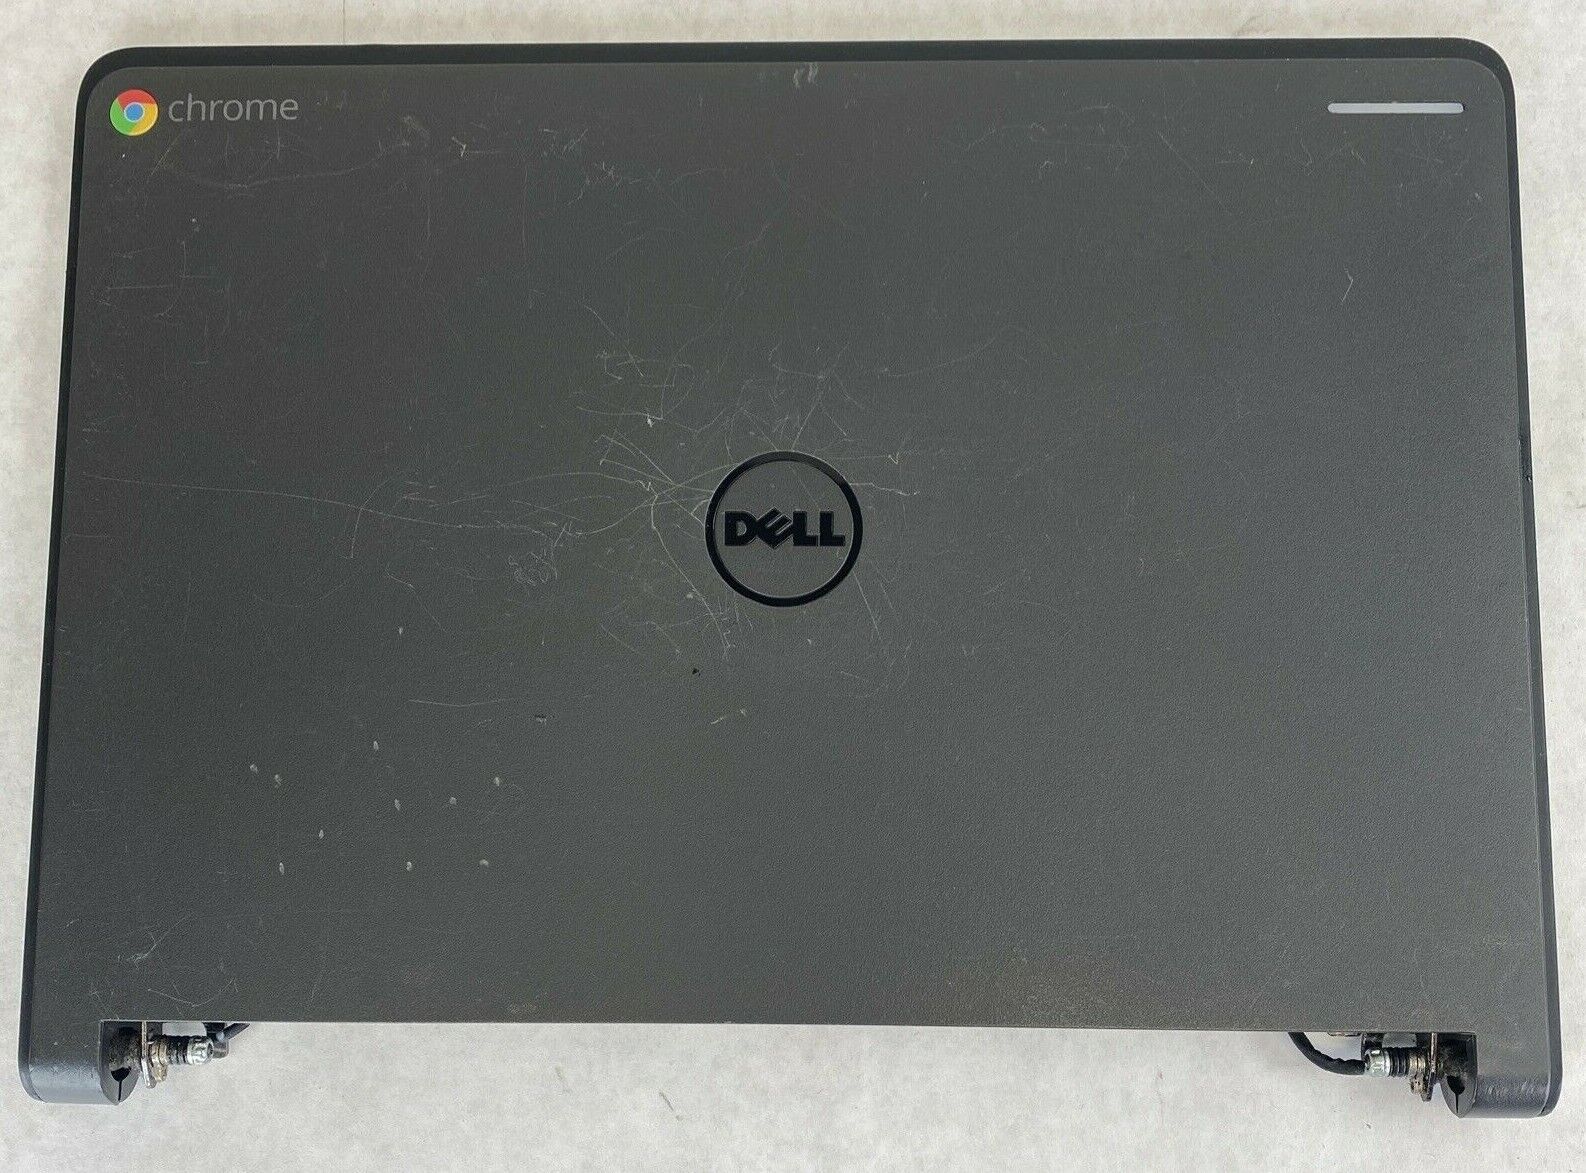 Dell Chromebook 11 P22T LCD complete screen assembly w/ Hinges